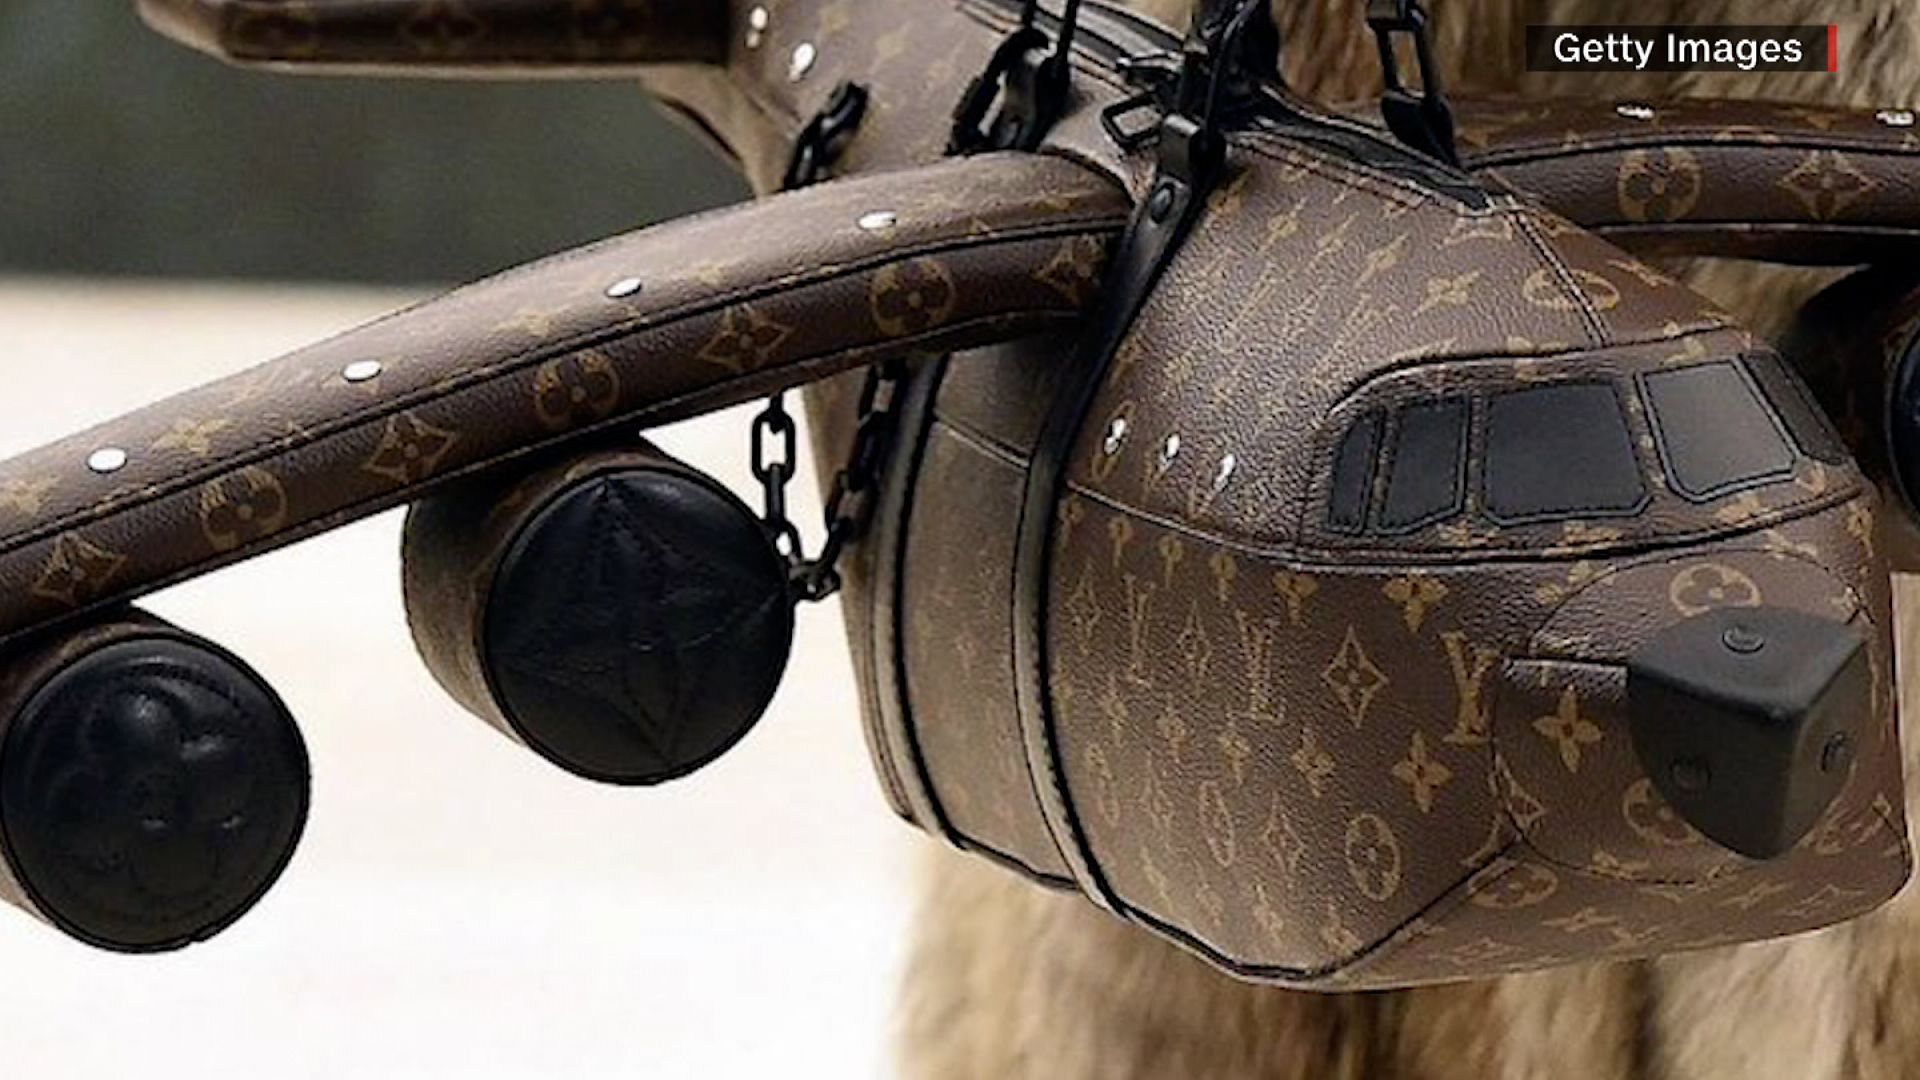 This airplane-shaped bag is selling for more than some actual